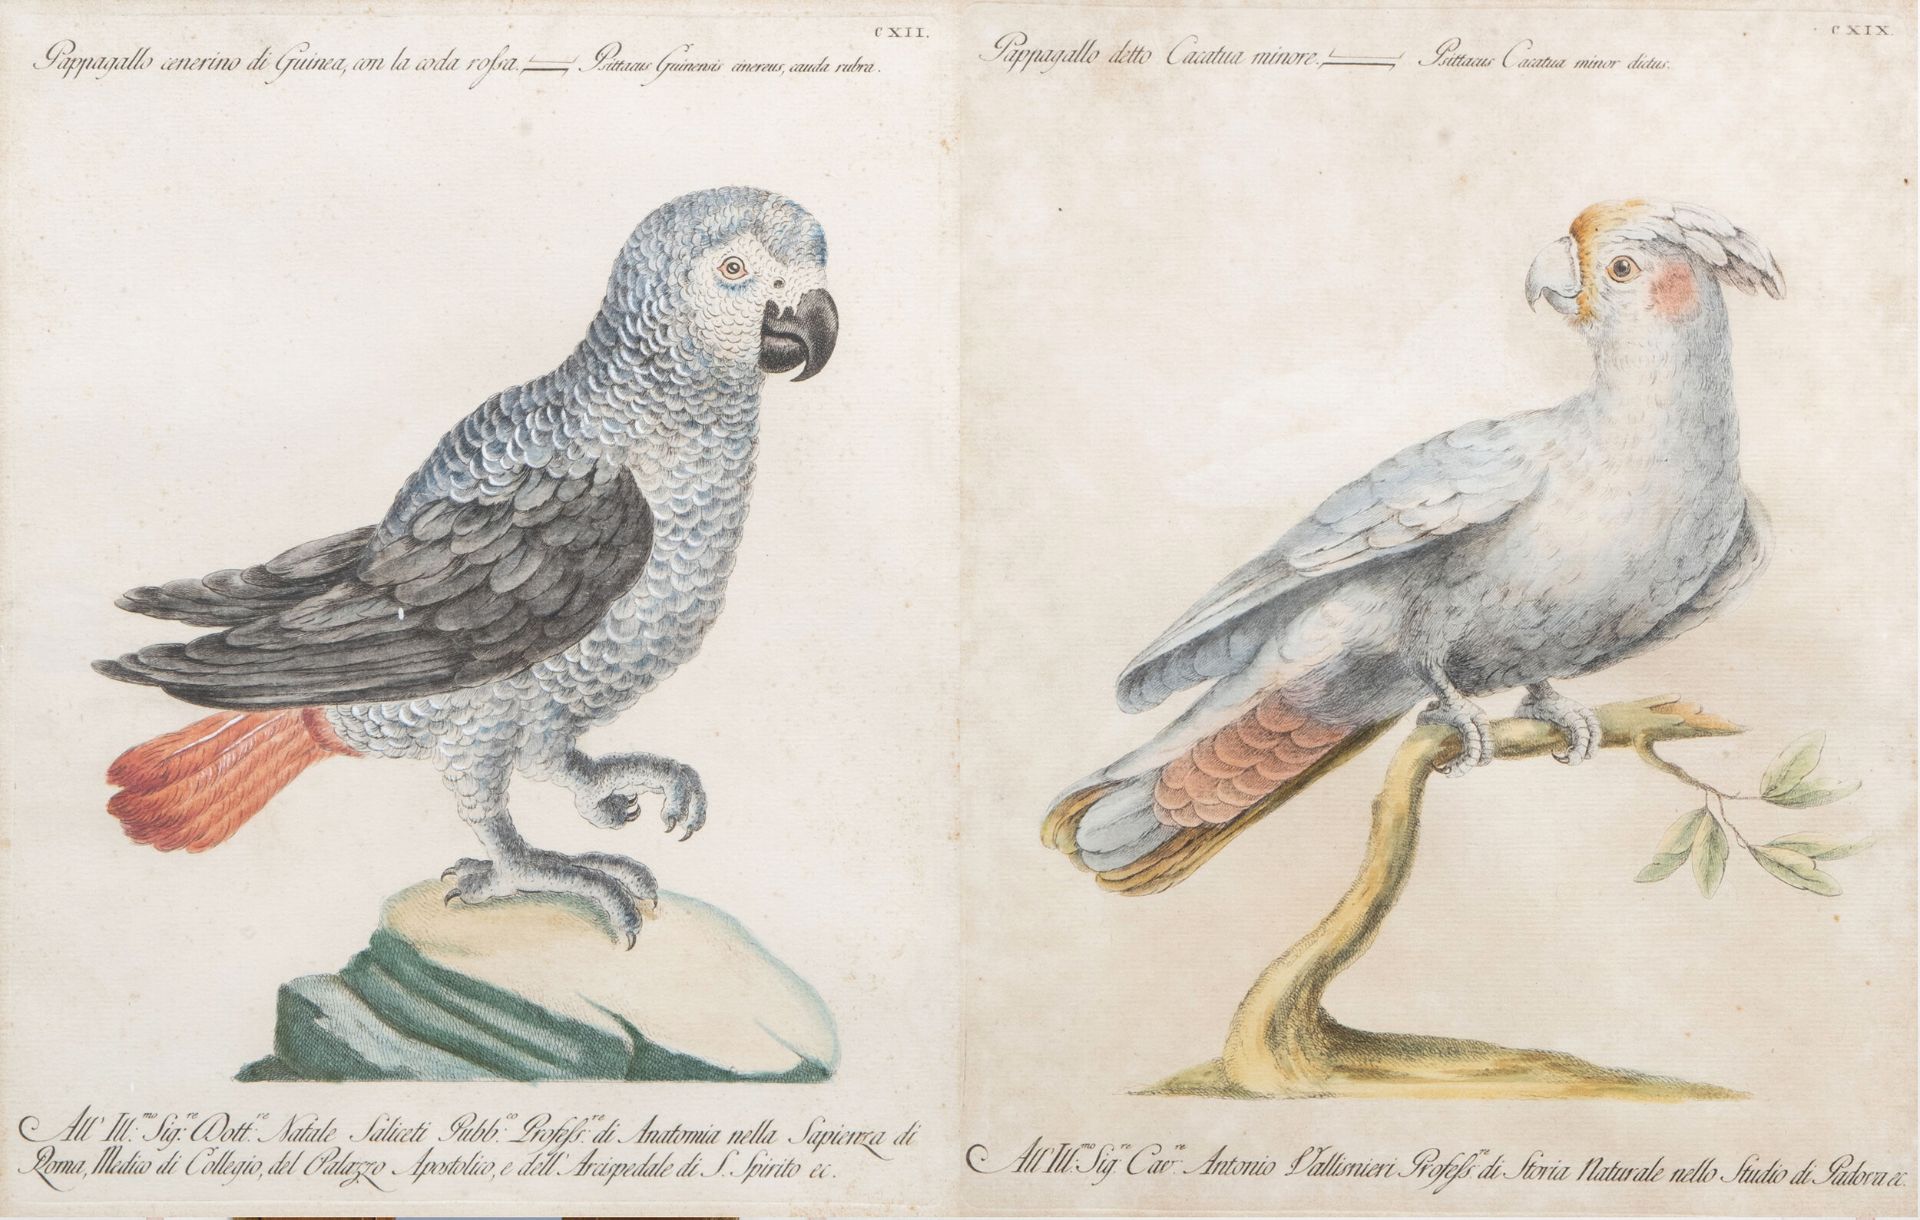 Xaverio Manetti (1723-1785): Two parrots, hand-coloured engravings, 18th C.